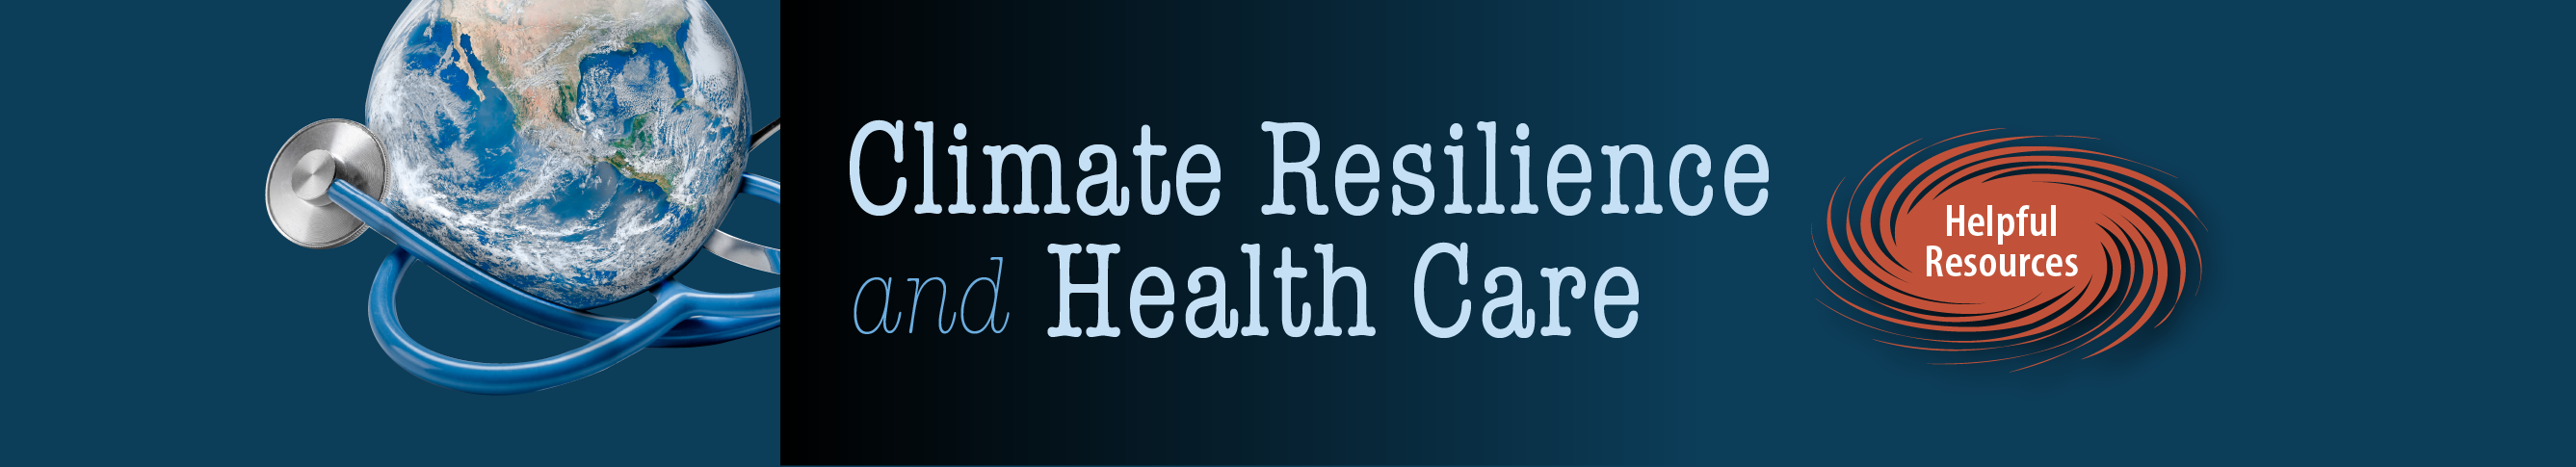 Climate Change and Health Care